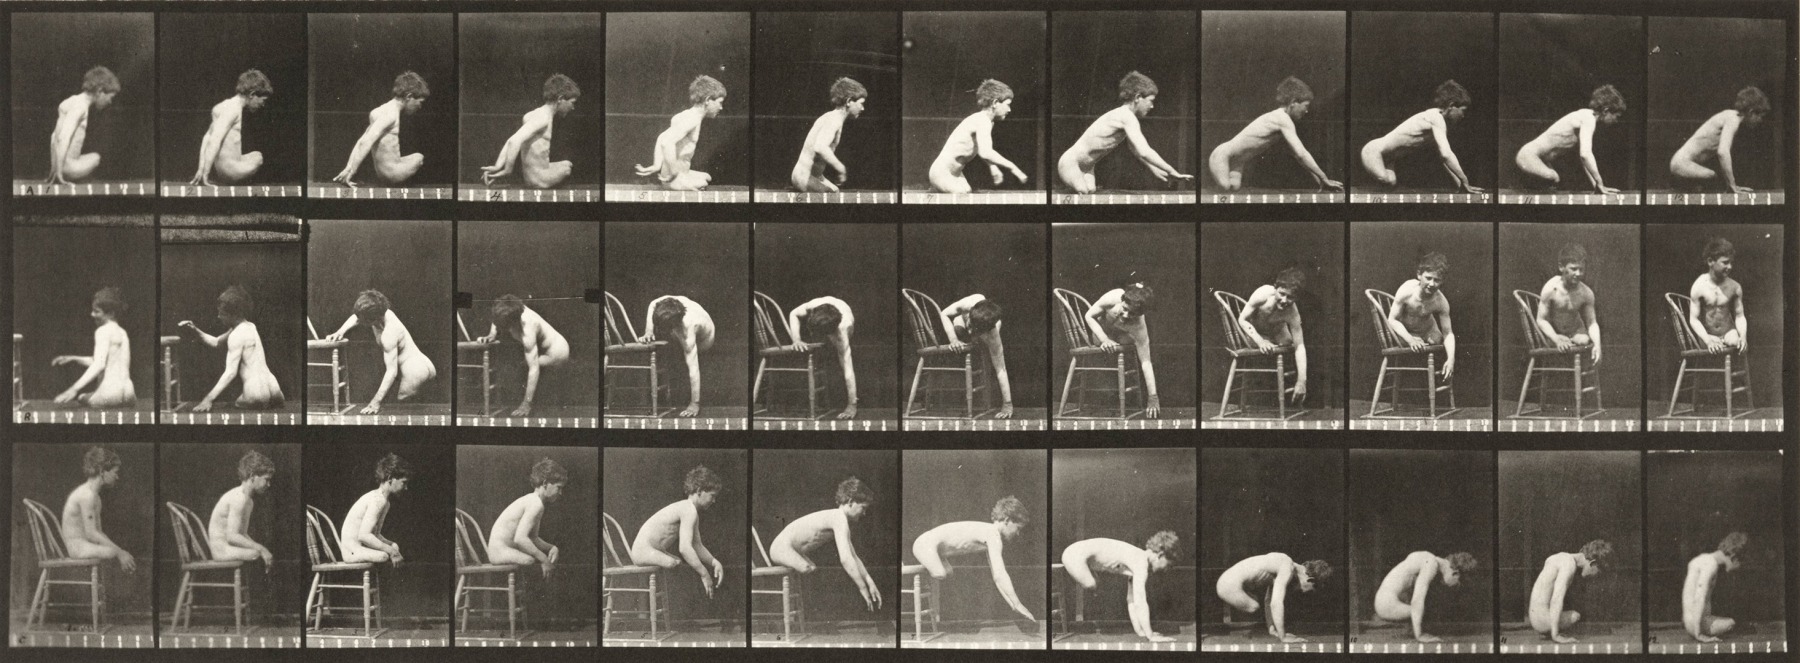 Sequence of black and white photos showing the movements of a boy with amputated legs getting of of a chair